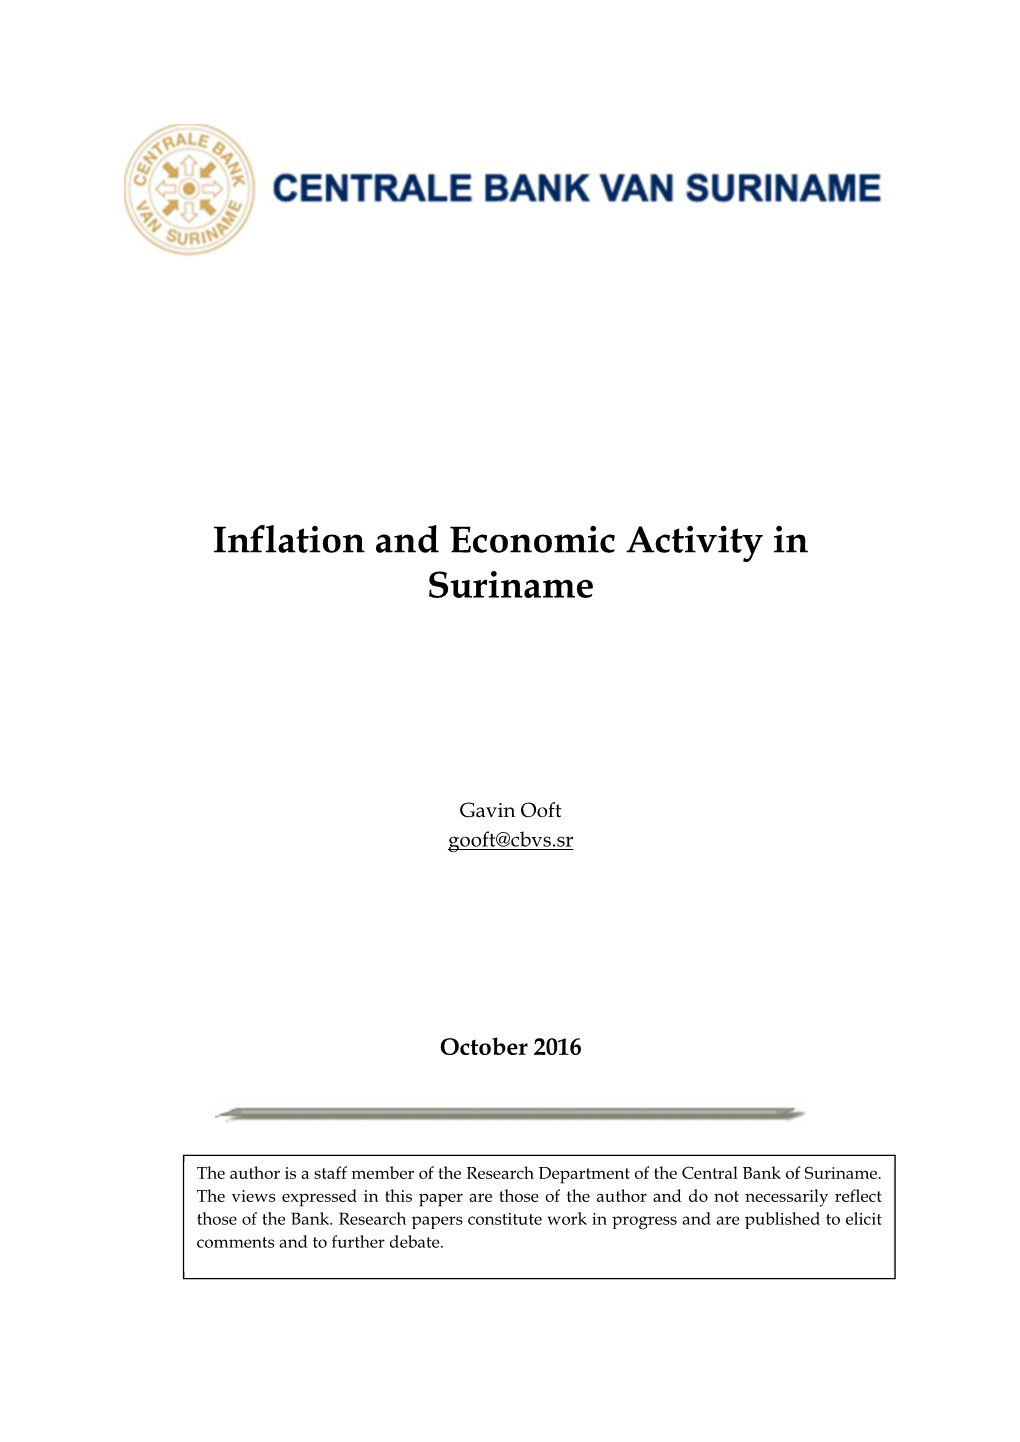 Inflation and Economic Activity in Suriname